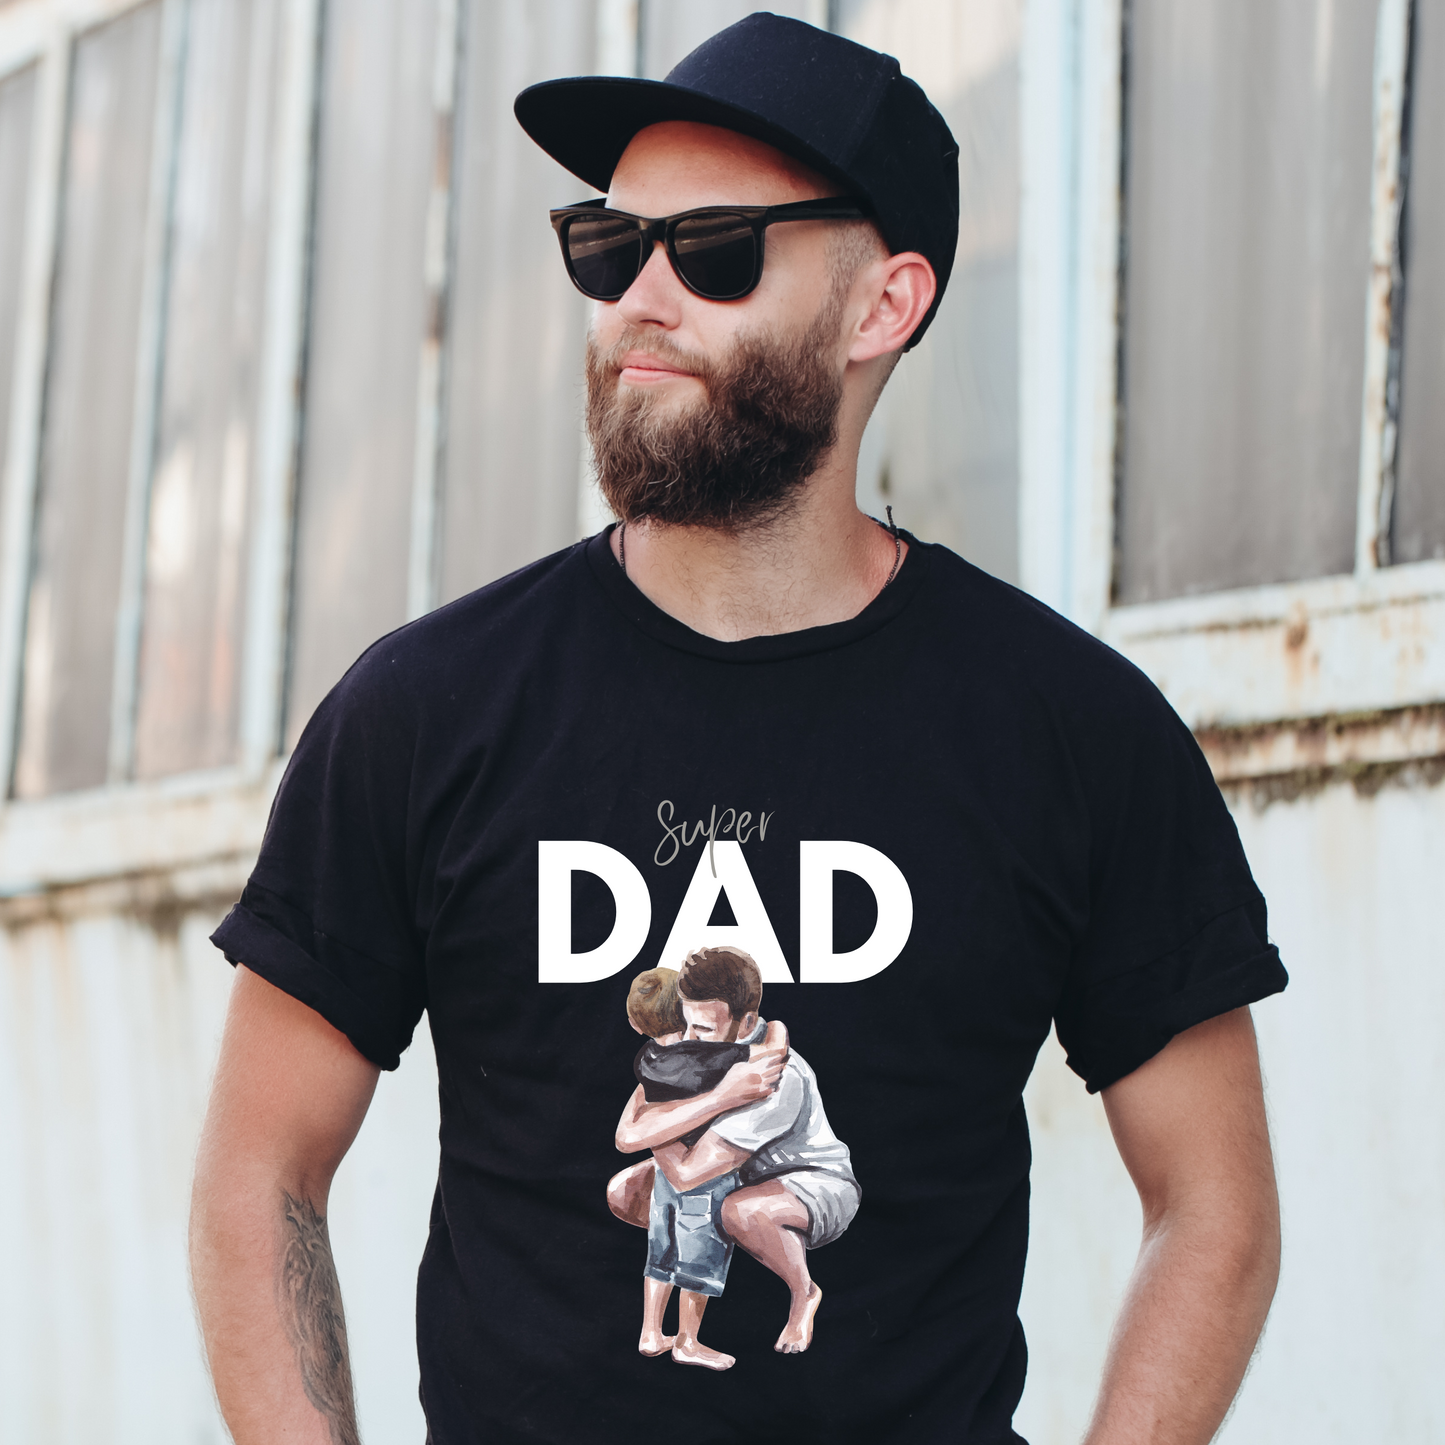 Super Dad -sayings on shirts - funny fathers day shirts - Premium t-shirt from Lees Krazy Teez - Shop now at Lees Krazy Teez